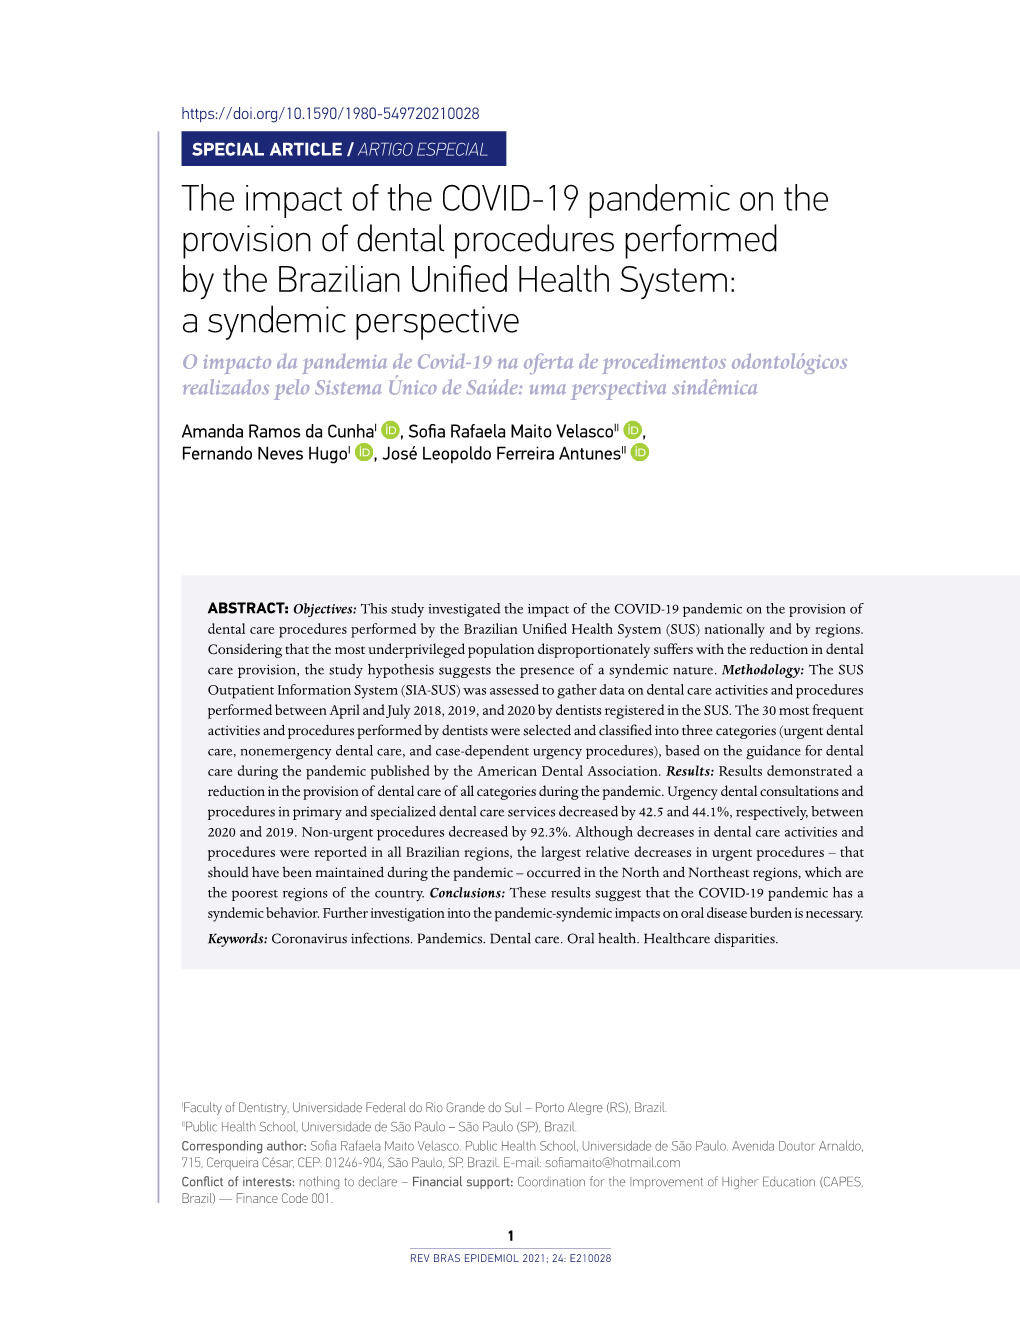 The Impact of the COVID-19 Pandemic on the Provision of Dental